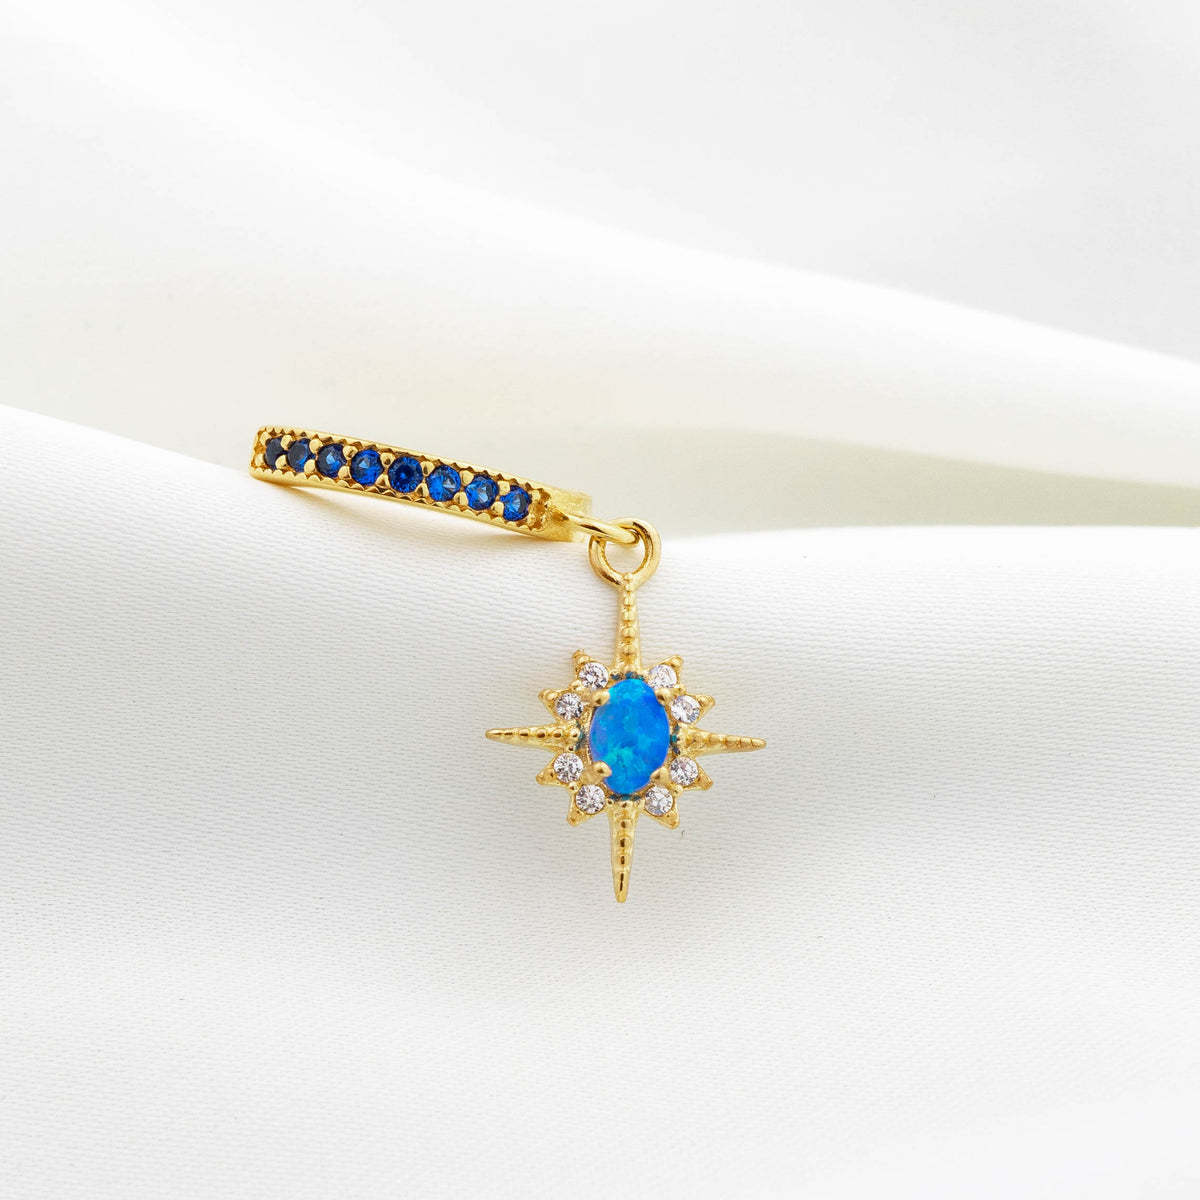 Sparkling Deep Blue Delicate Opal North Star Earring